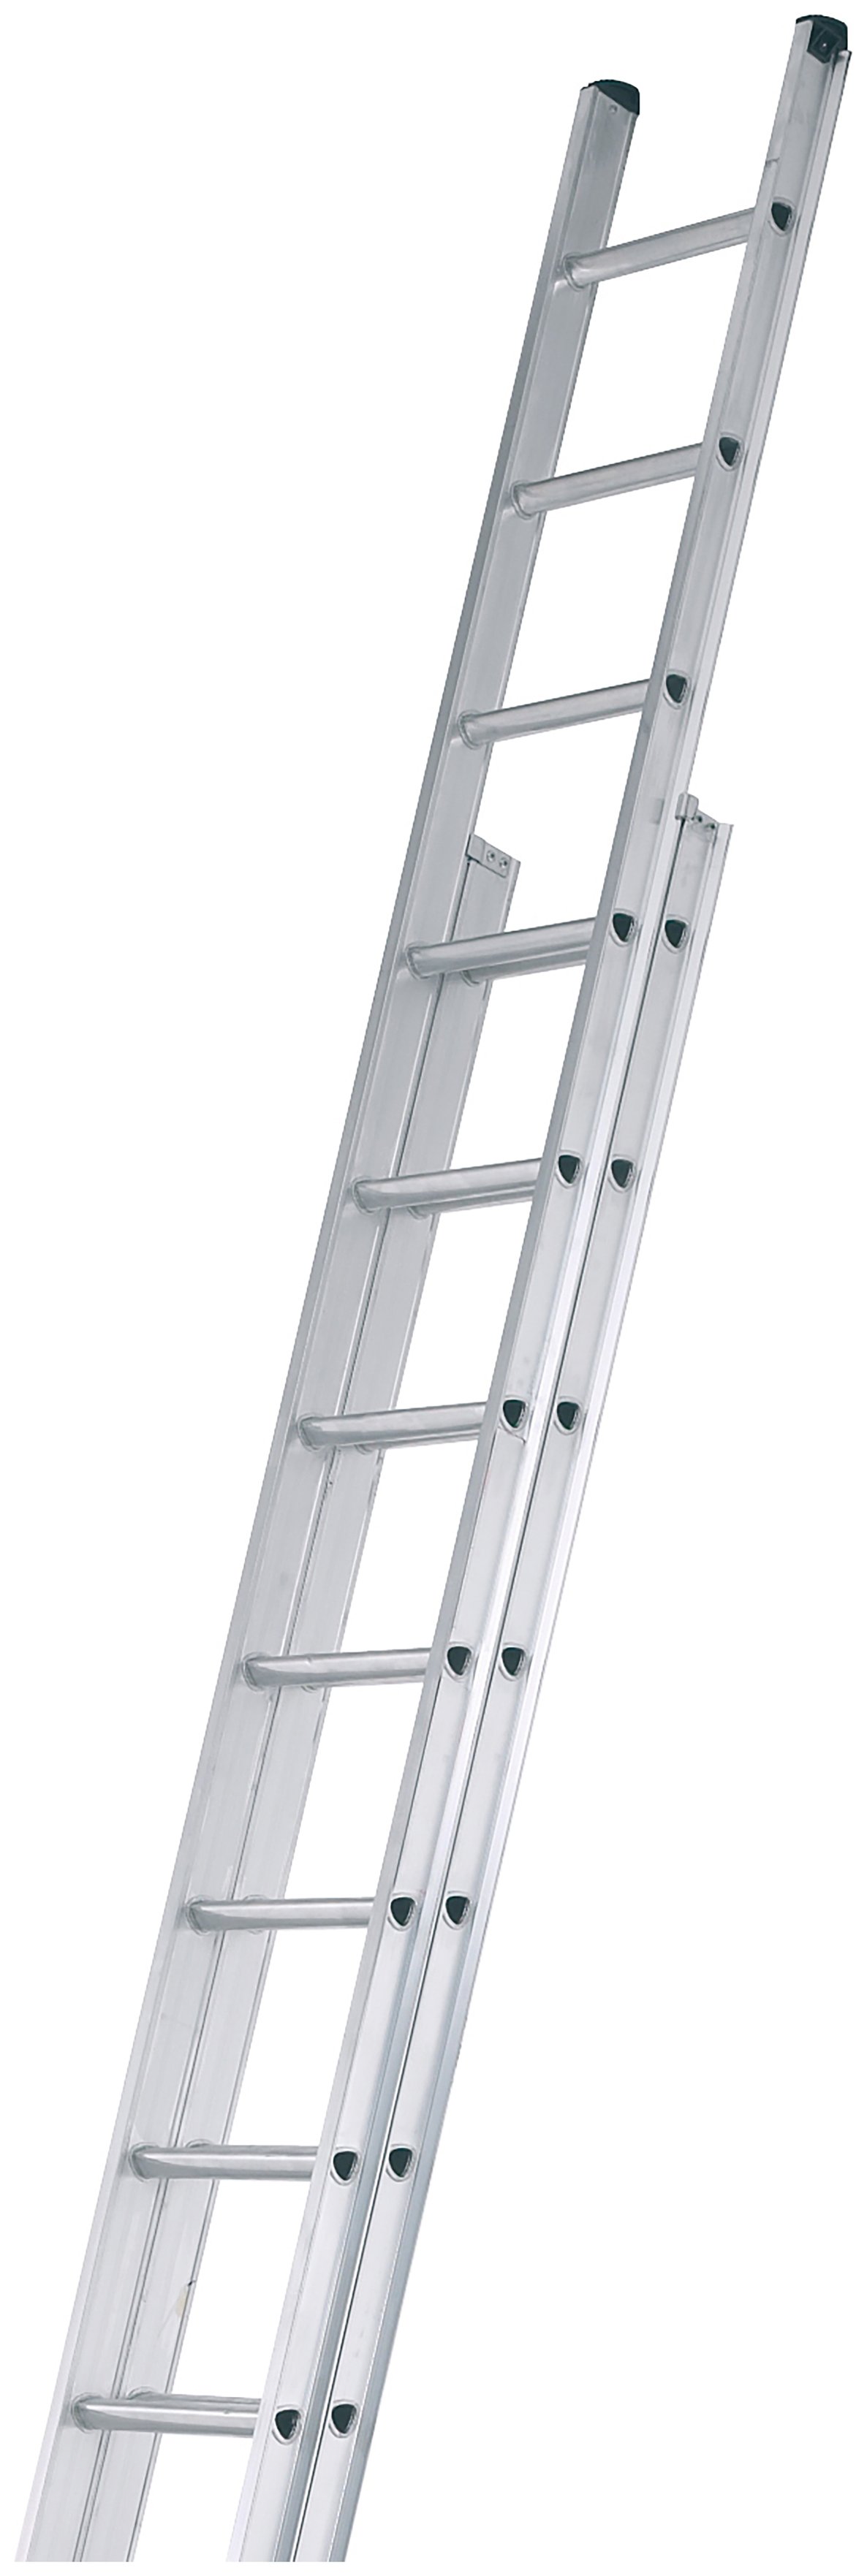 Abru DIY Extension Ladder 4.2M Double 8.23M Max *SWH